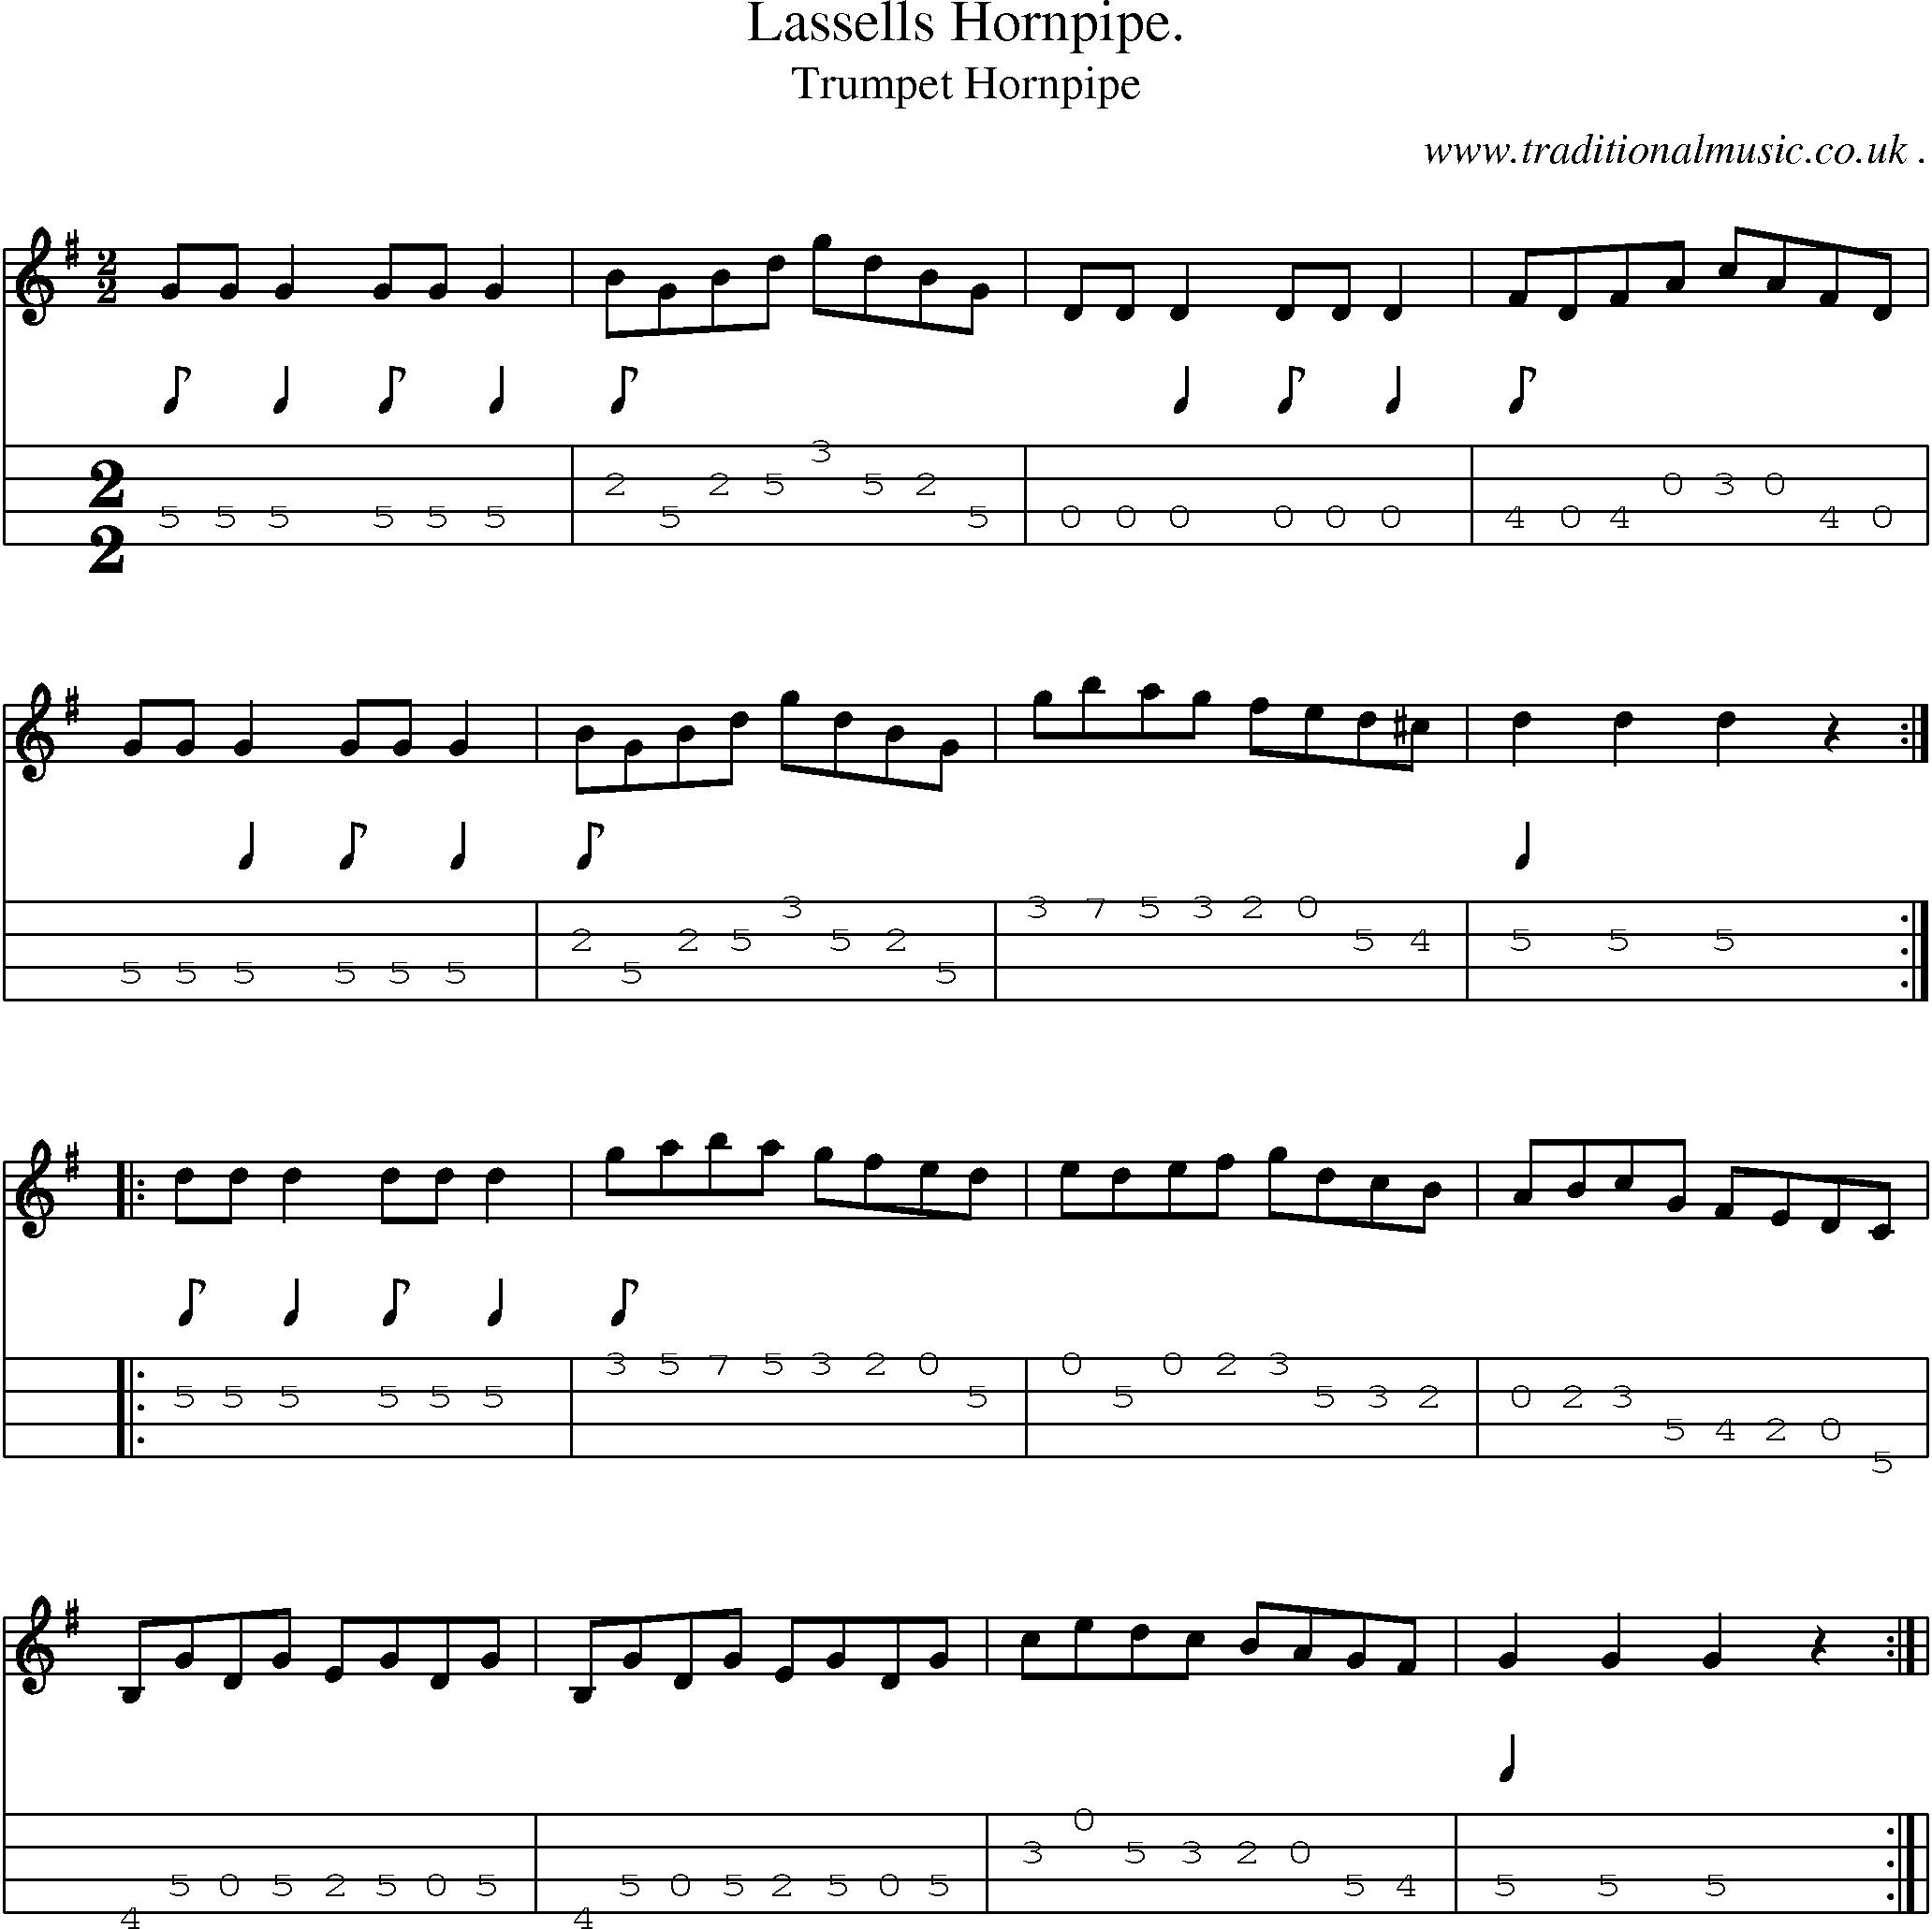 Sheet-Music and Mandolin Tabs for Lassells Hornpipe